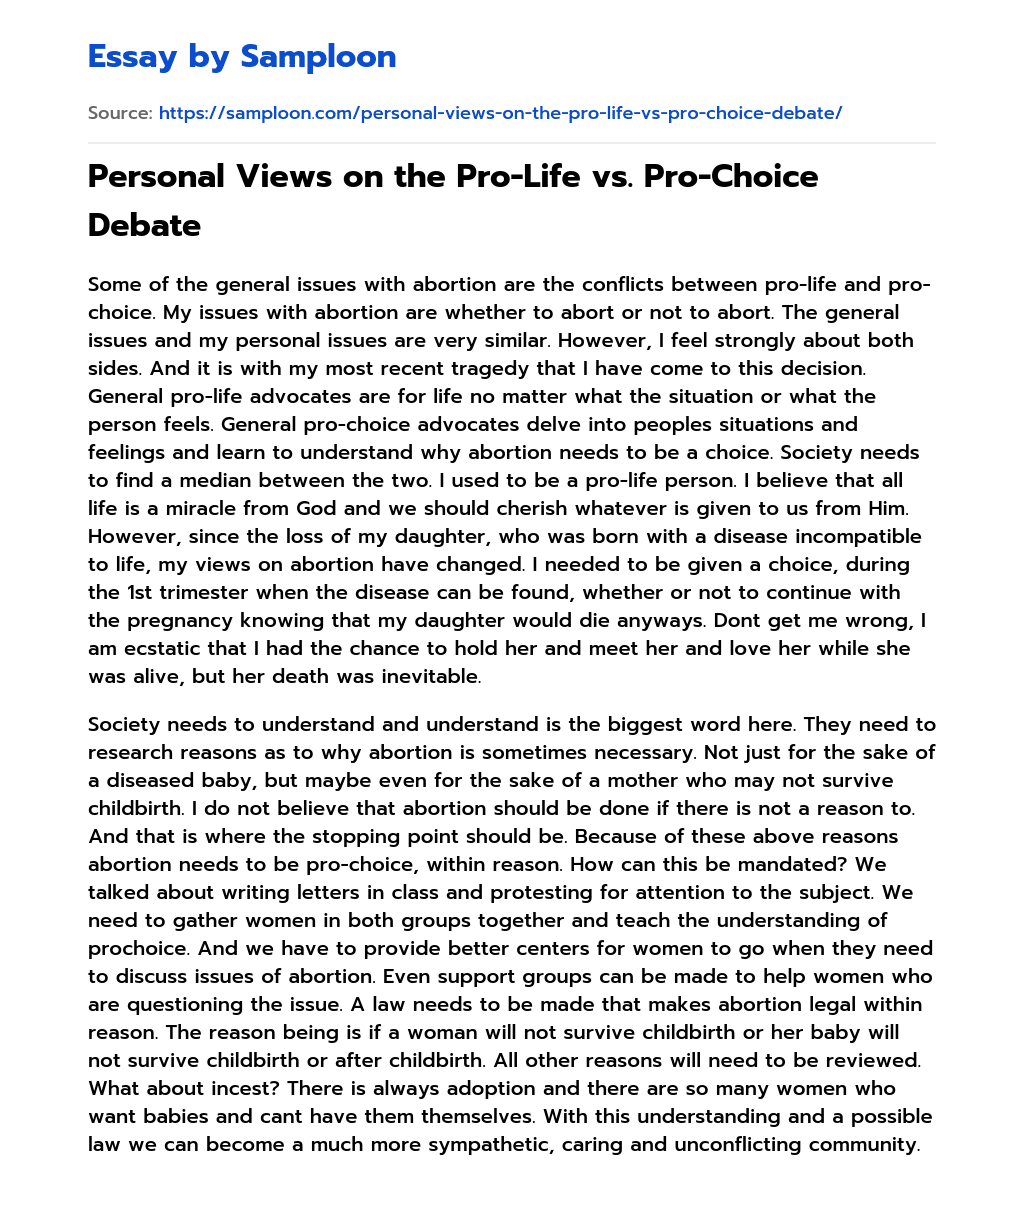 Personal Views on the Pro-Life vs. Pro-Choice Debate essay